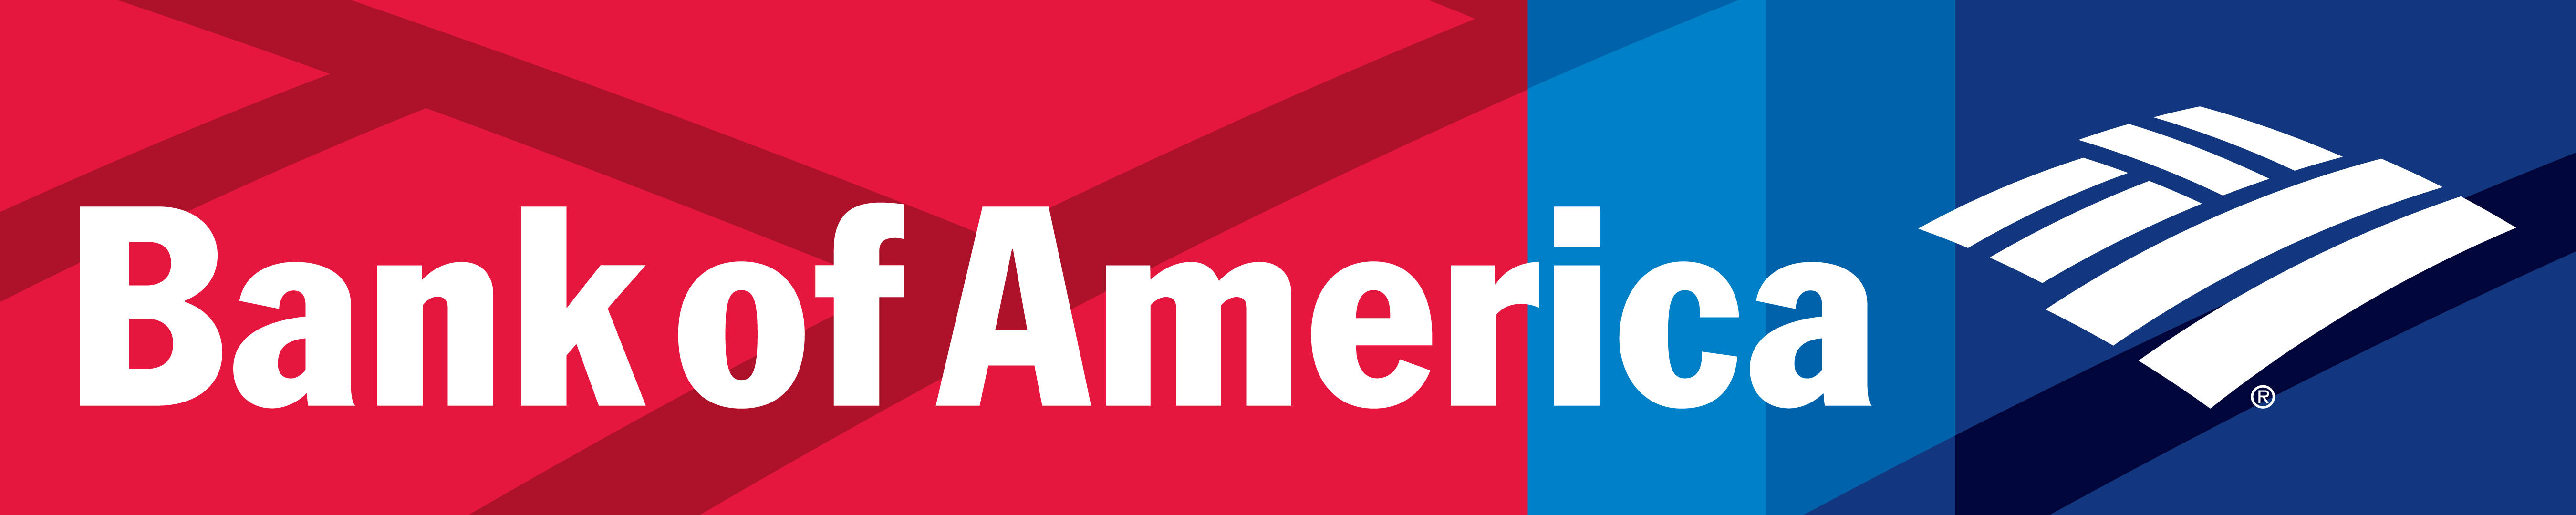 Blue And Red Bank Of America Logo Wallpaper